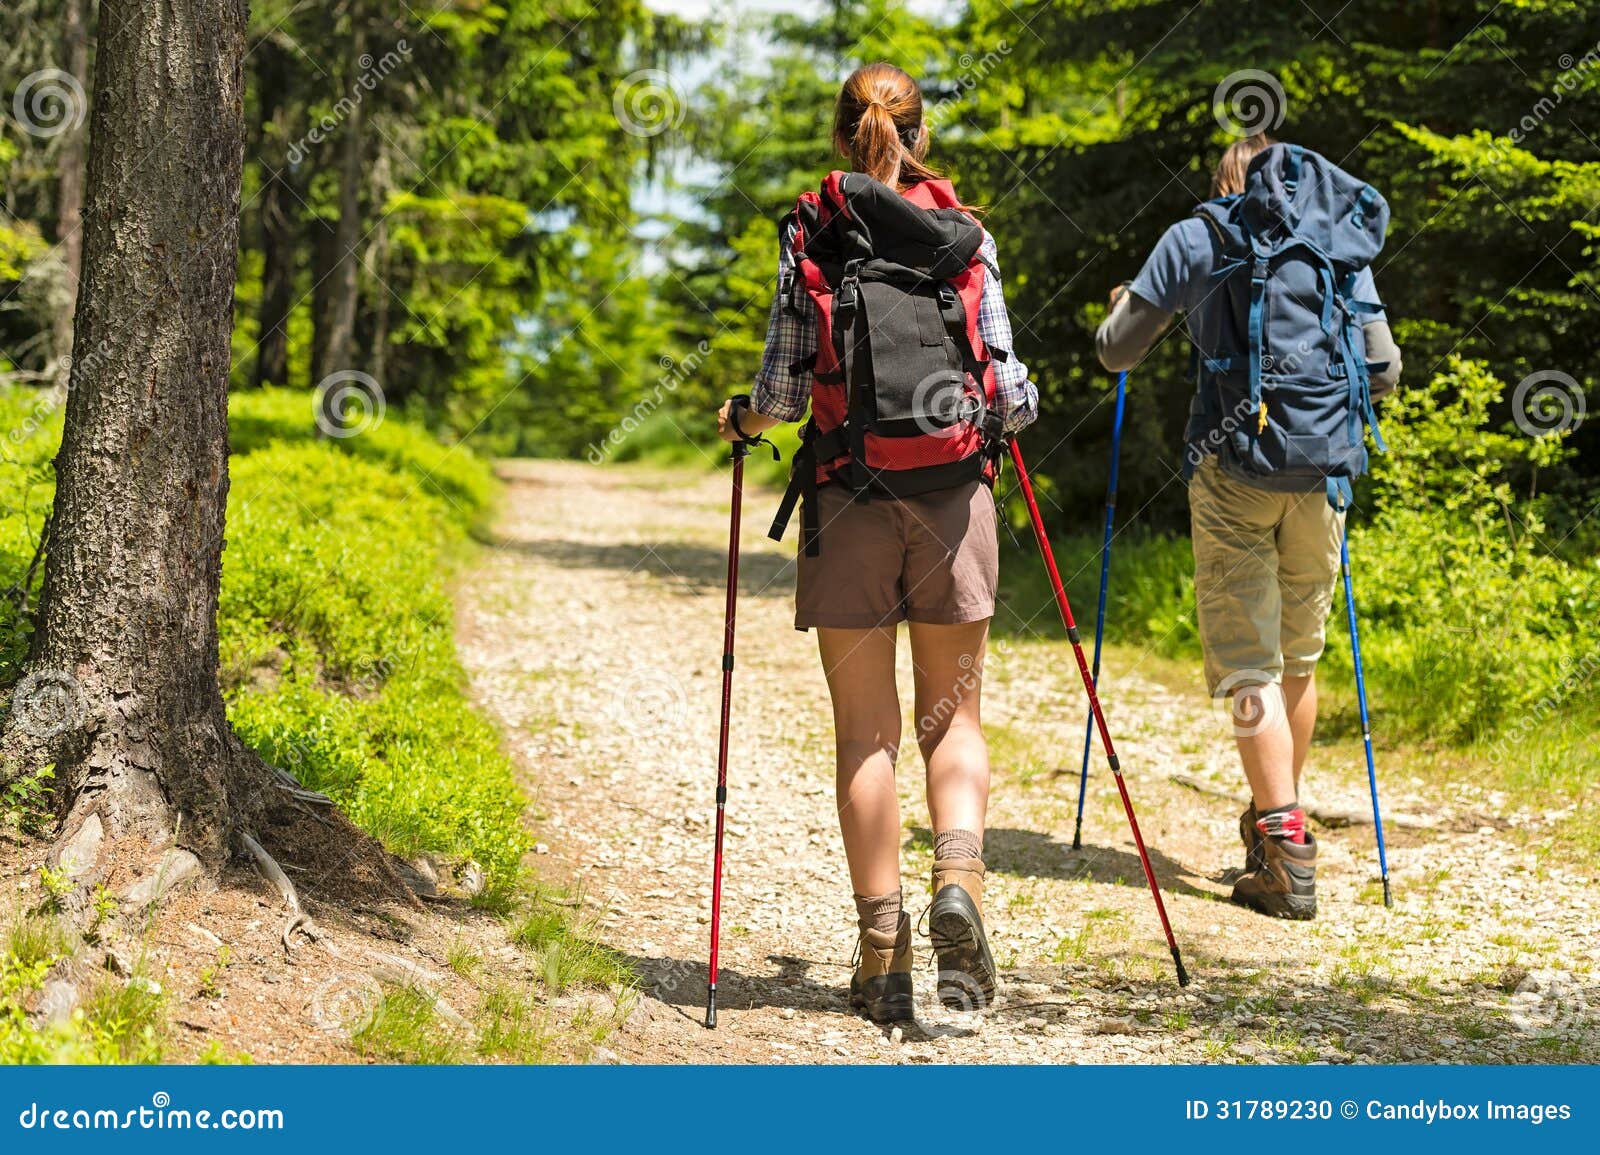 hikers on path with trekking poles